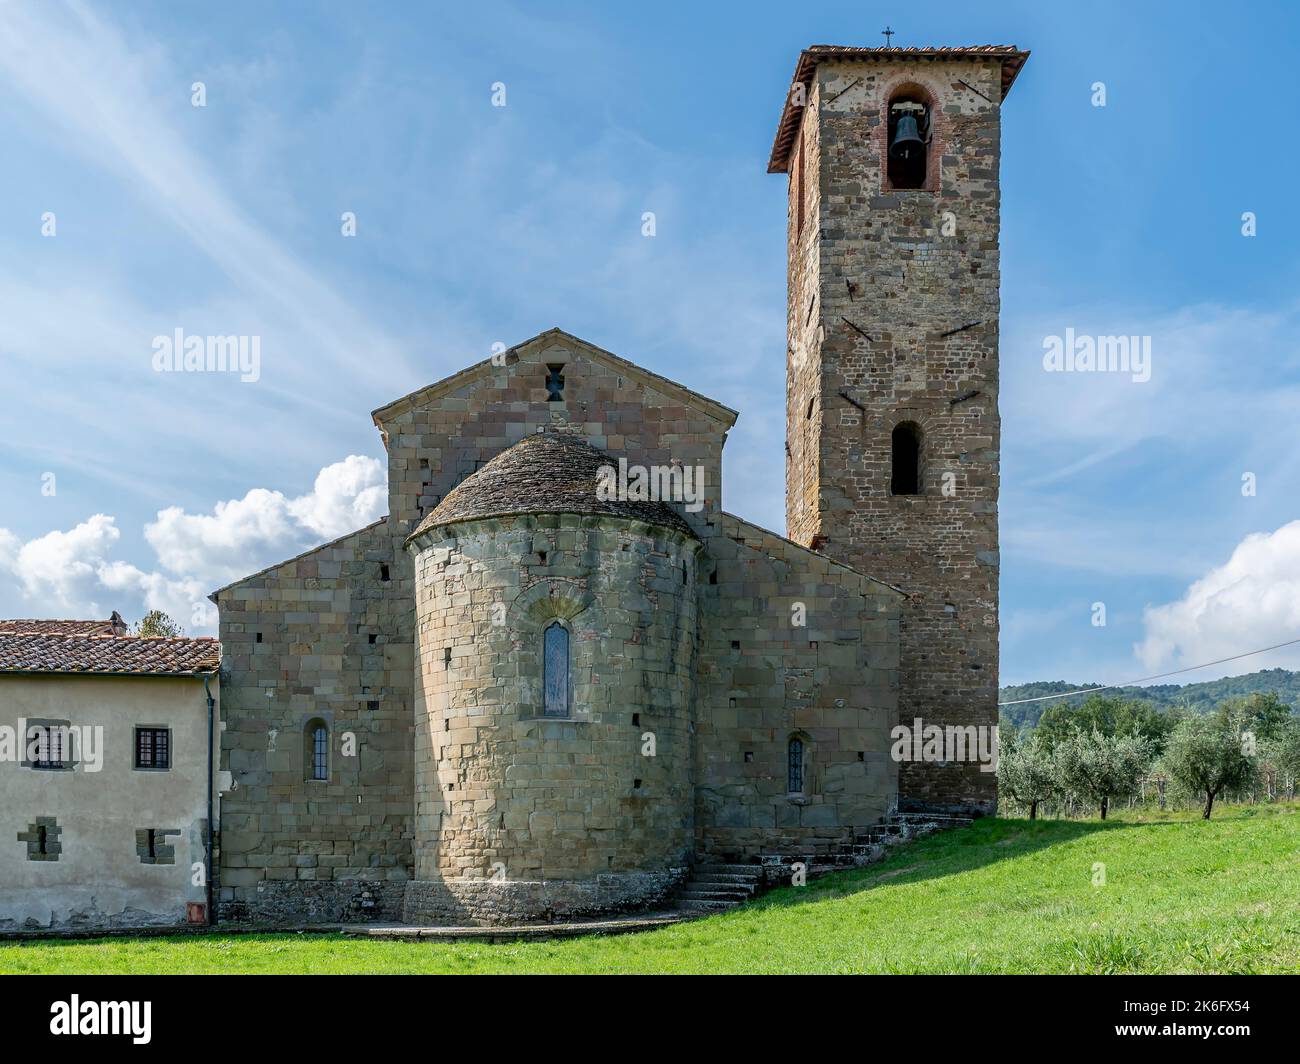 The apse of the Parish church of San Romolo a Gaville, Figline and Incisa Valdarno, Florence, Italy Stock Photo